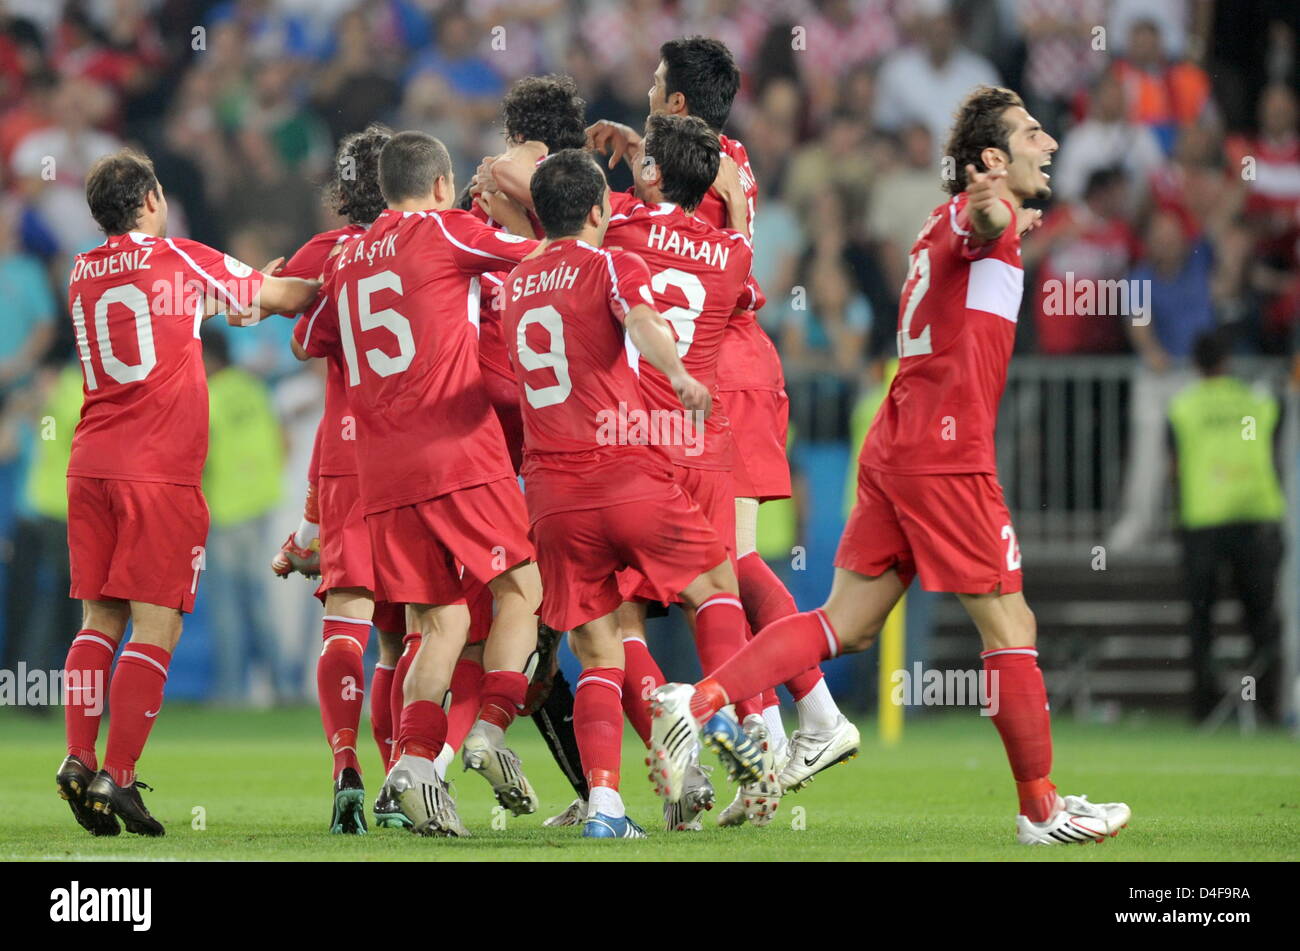 Hamit Altintop of Turkey (R) jubilates with his teammates after the UEFA EURO 2008 quarter final match between Croatia and Turkey at the Ernst Happel stadium in Vienna, Austria, 20 June 2008. Turkey won 1:3 in penalty shootout. Photo: Achim Scheidemann dpa +please note UEFA restrictions particulary in regard to slide shows and 'No Mobile Services'+ +++(c) dpa - Bildfunk+++ Stock Photo